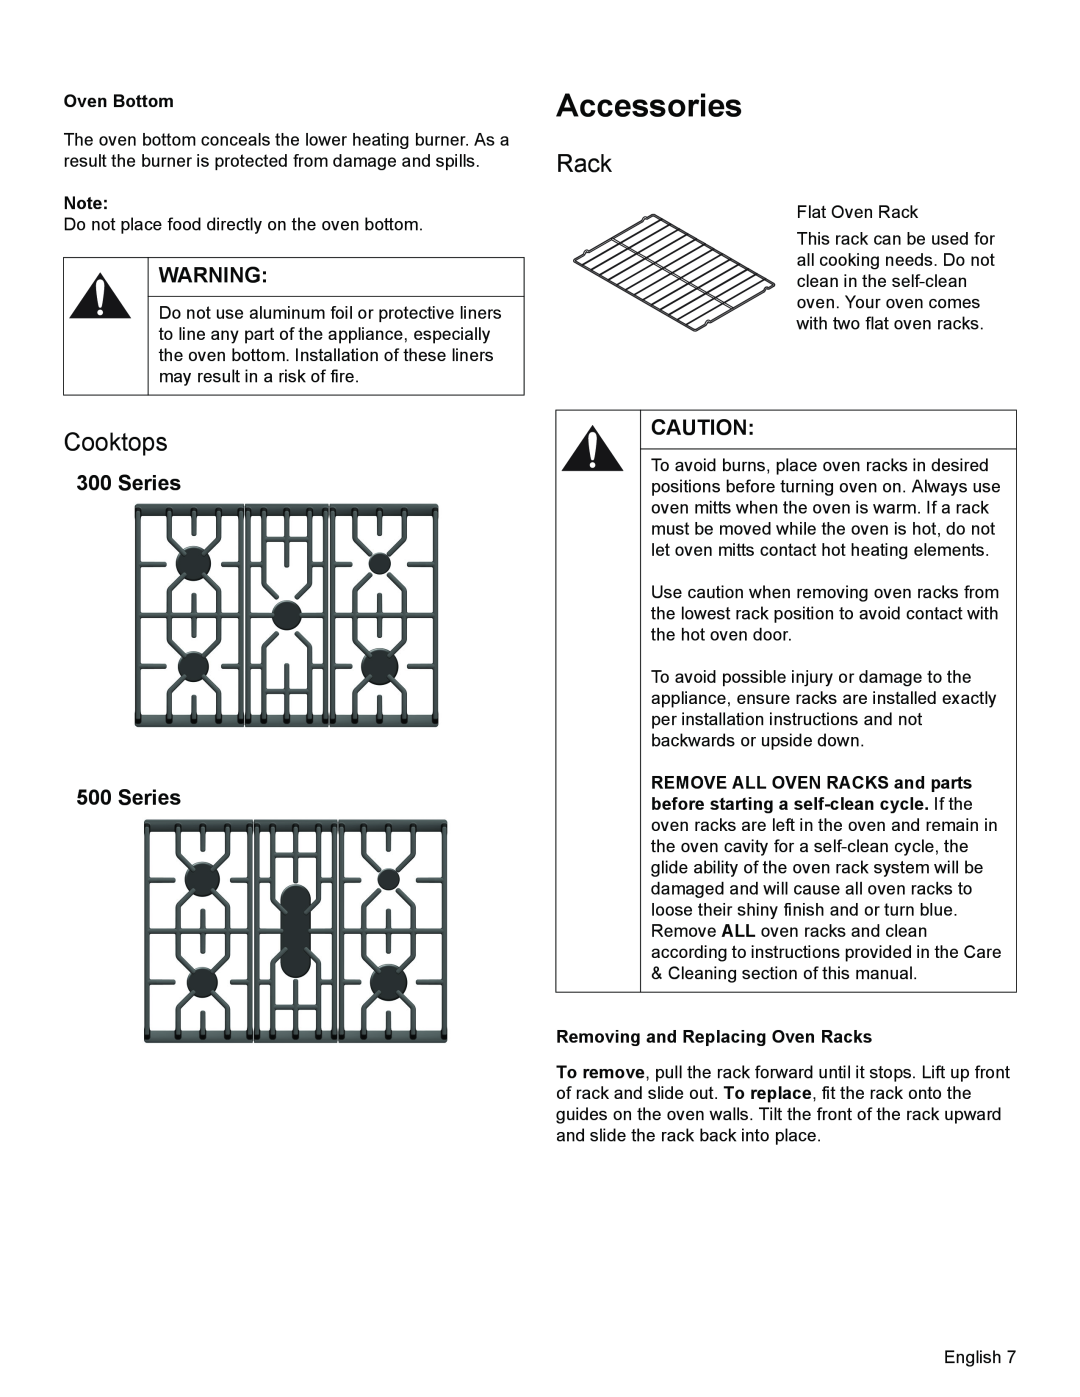 Bosch Appliances HGS3023UC manual Accessories, Cooktops, Oven Bottom, Removing and Replacing Oven Racks 